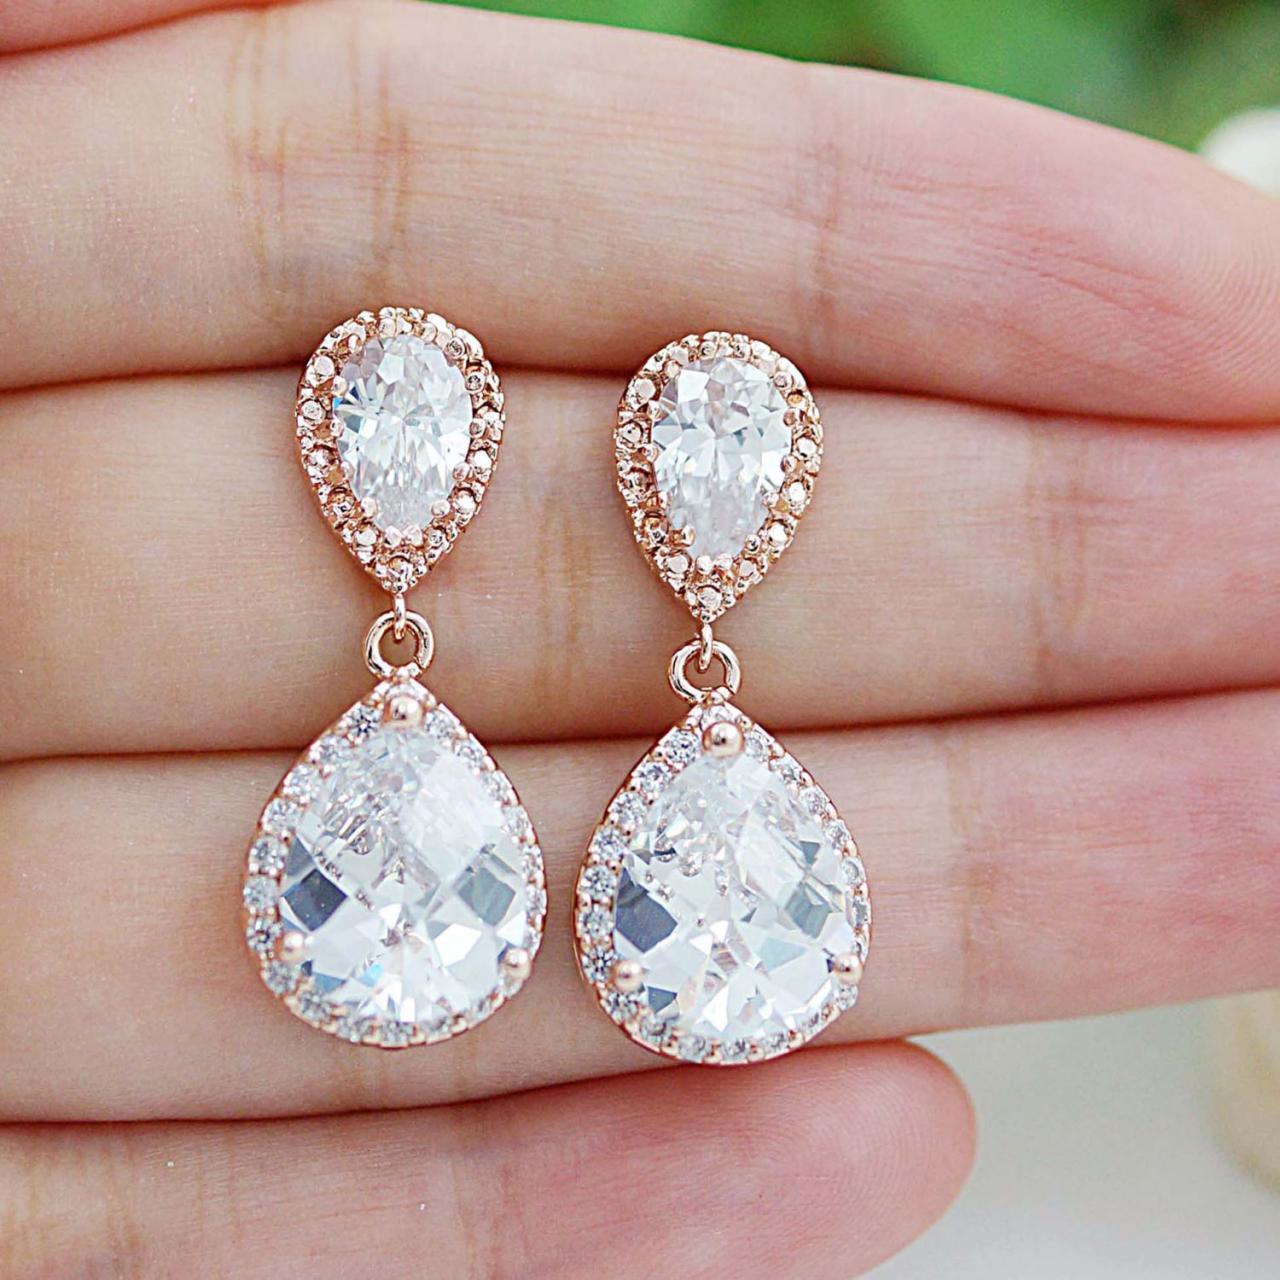 Wedding Jewelry Bridal Earrings Bridesmaid Gift Bridal Jewelry Lux Rose Gold Clear White Cubic Zirconia Crystal Tear Drop Wedding Earrings